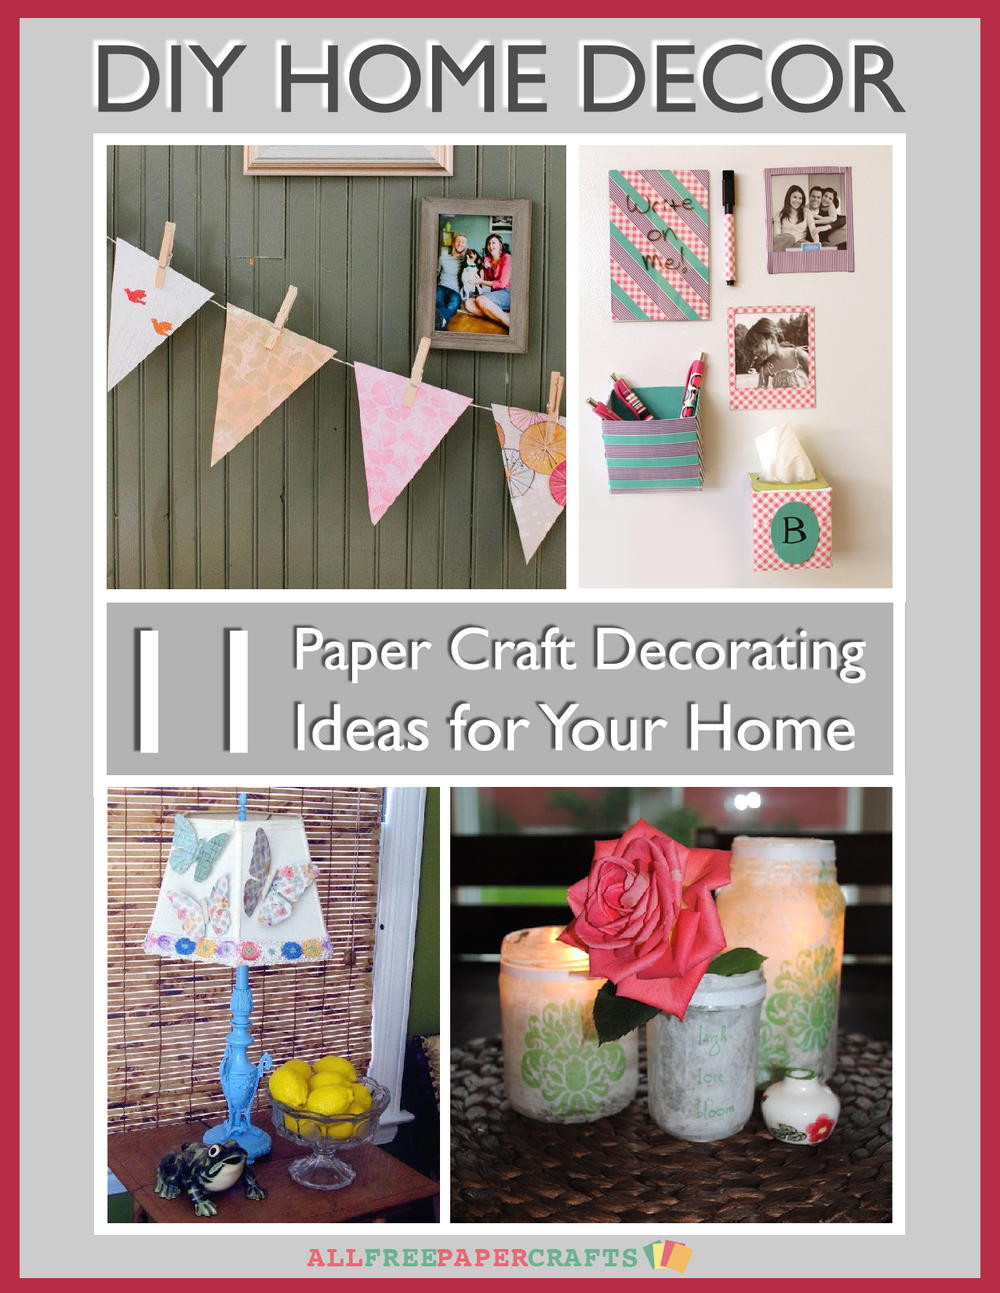 DIY Home Decorations Crafts
 DIY Home Decor 11 Paper Craft Decorating Ideas for Your